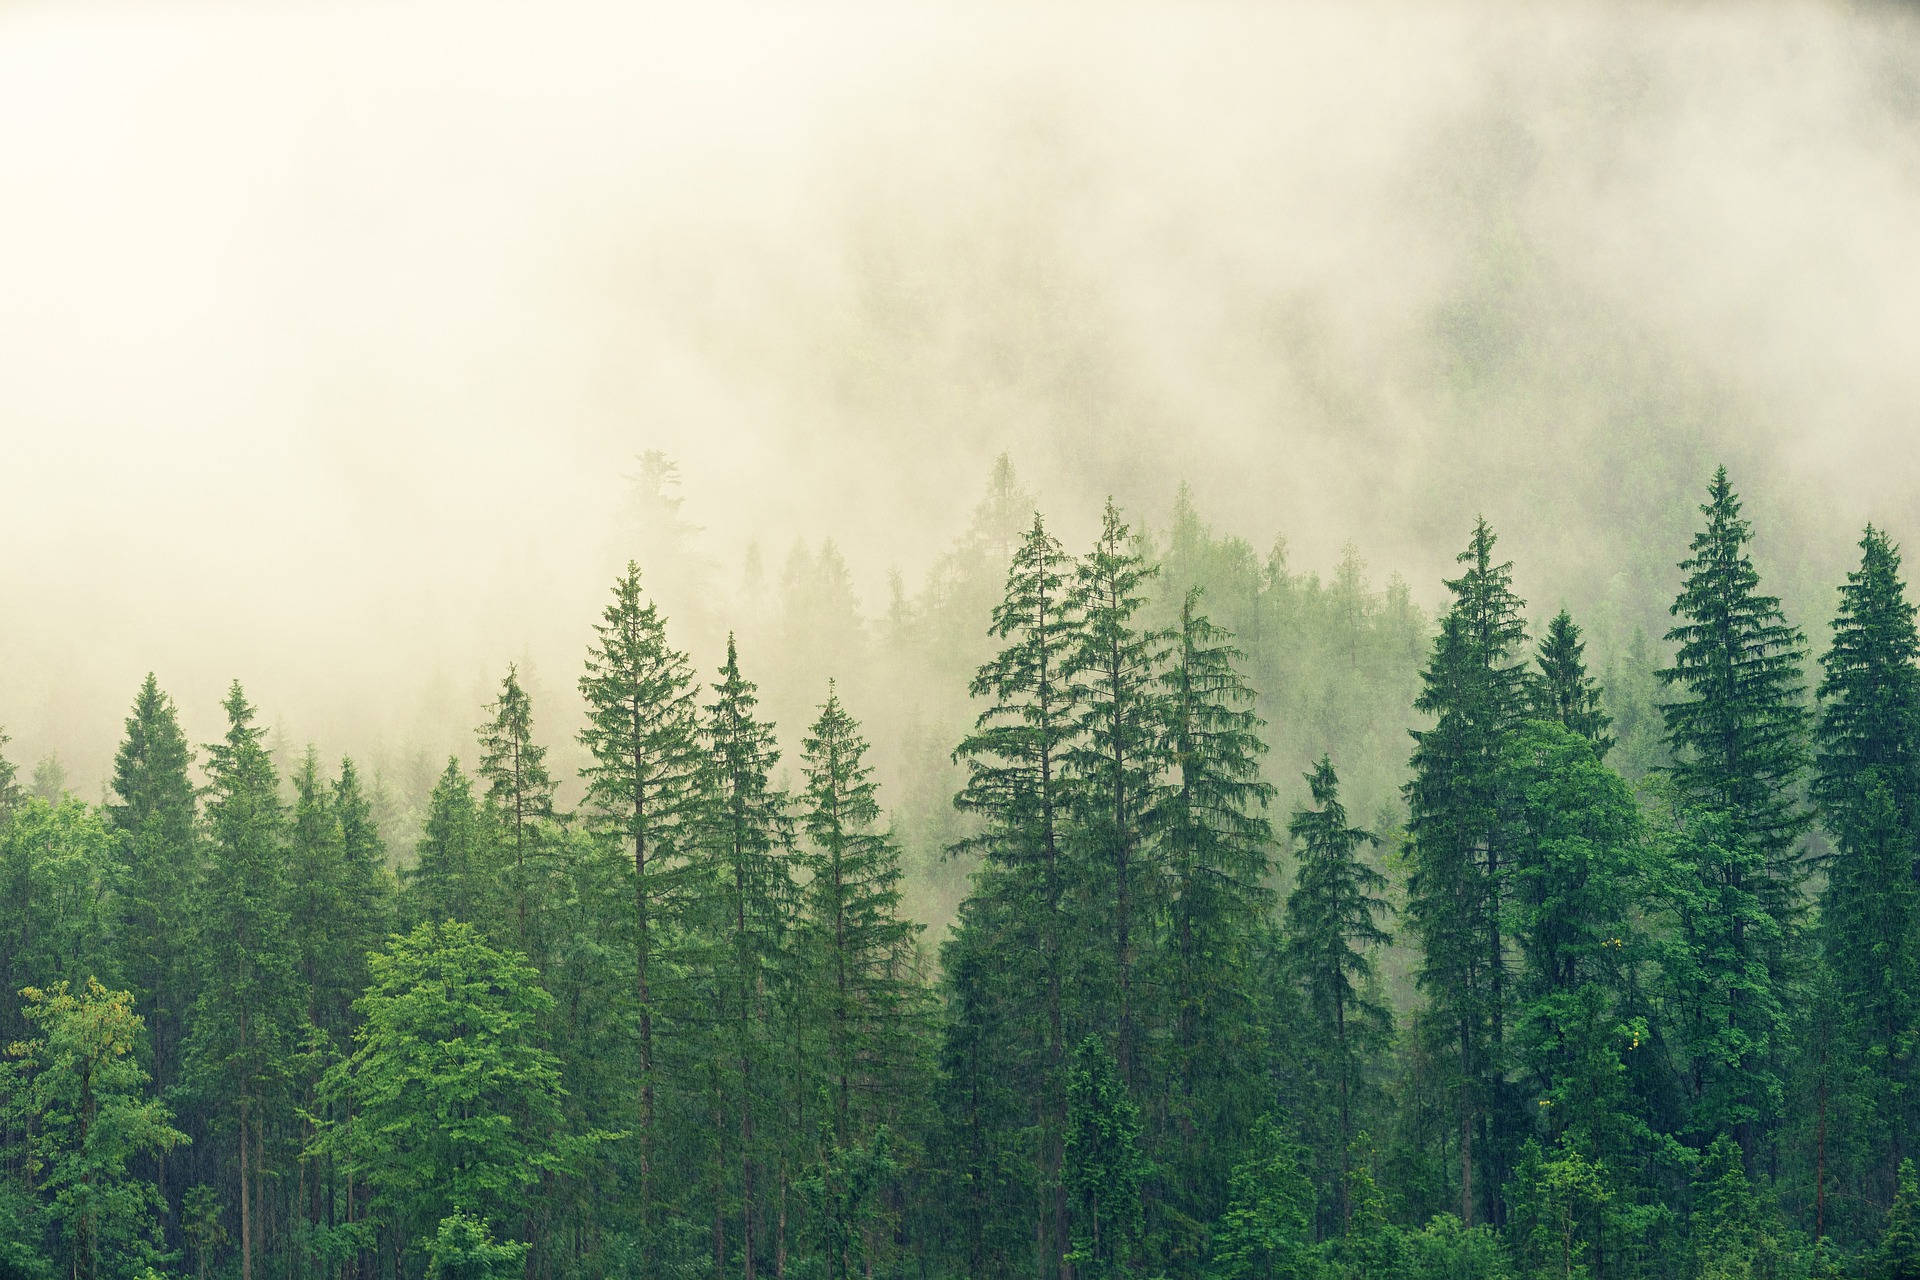 A forest of evergreen trees in the fog. - Woods